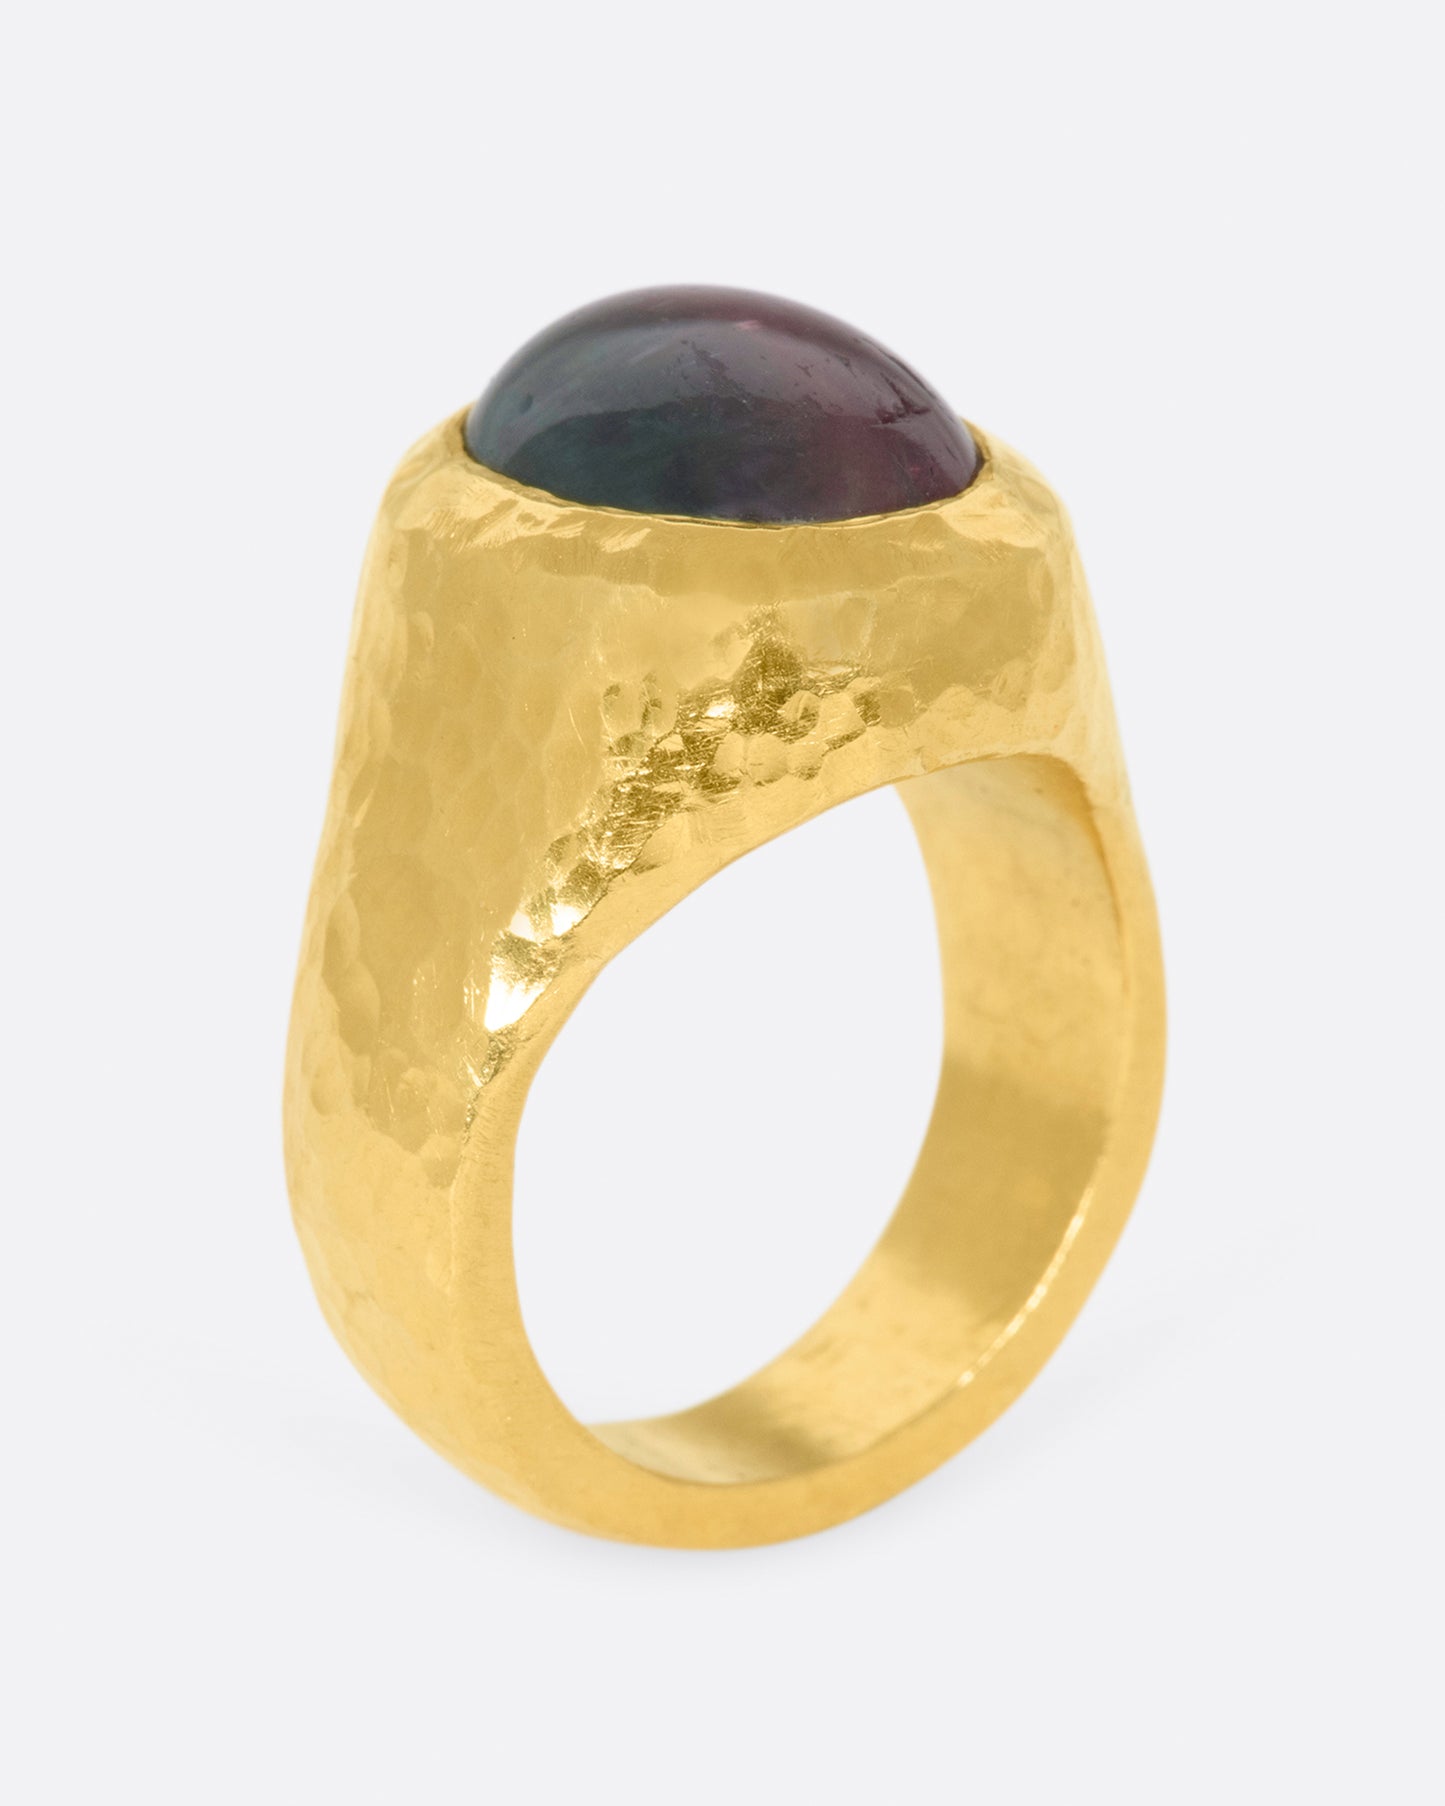 A bicolor pink and green tourmaline sits at the center of this heavy, hammered, high karat gold ring.